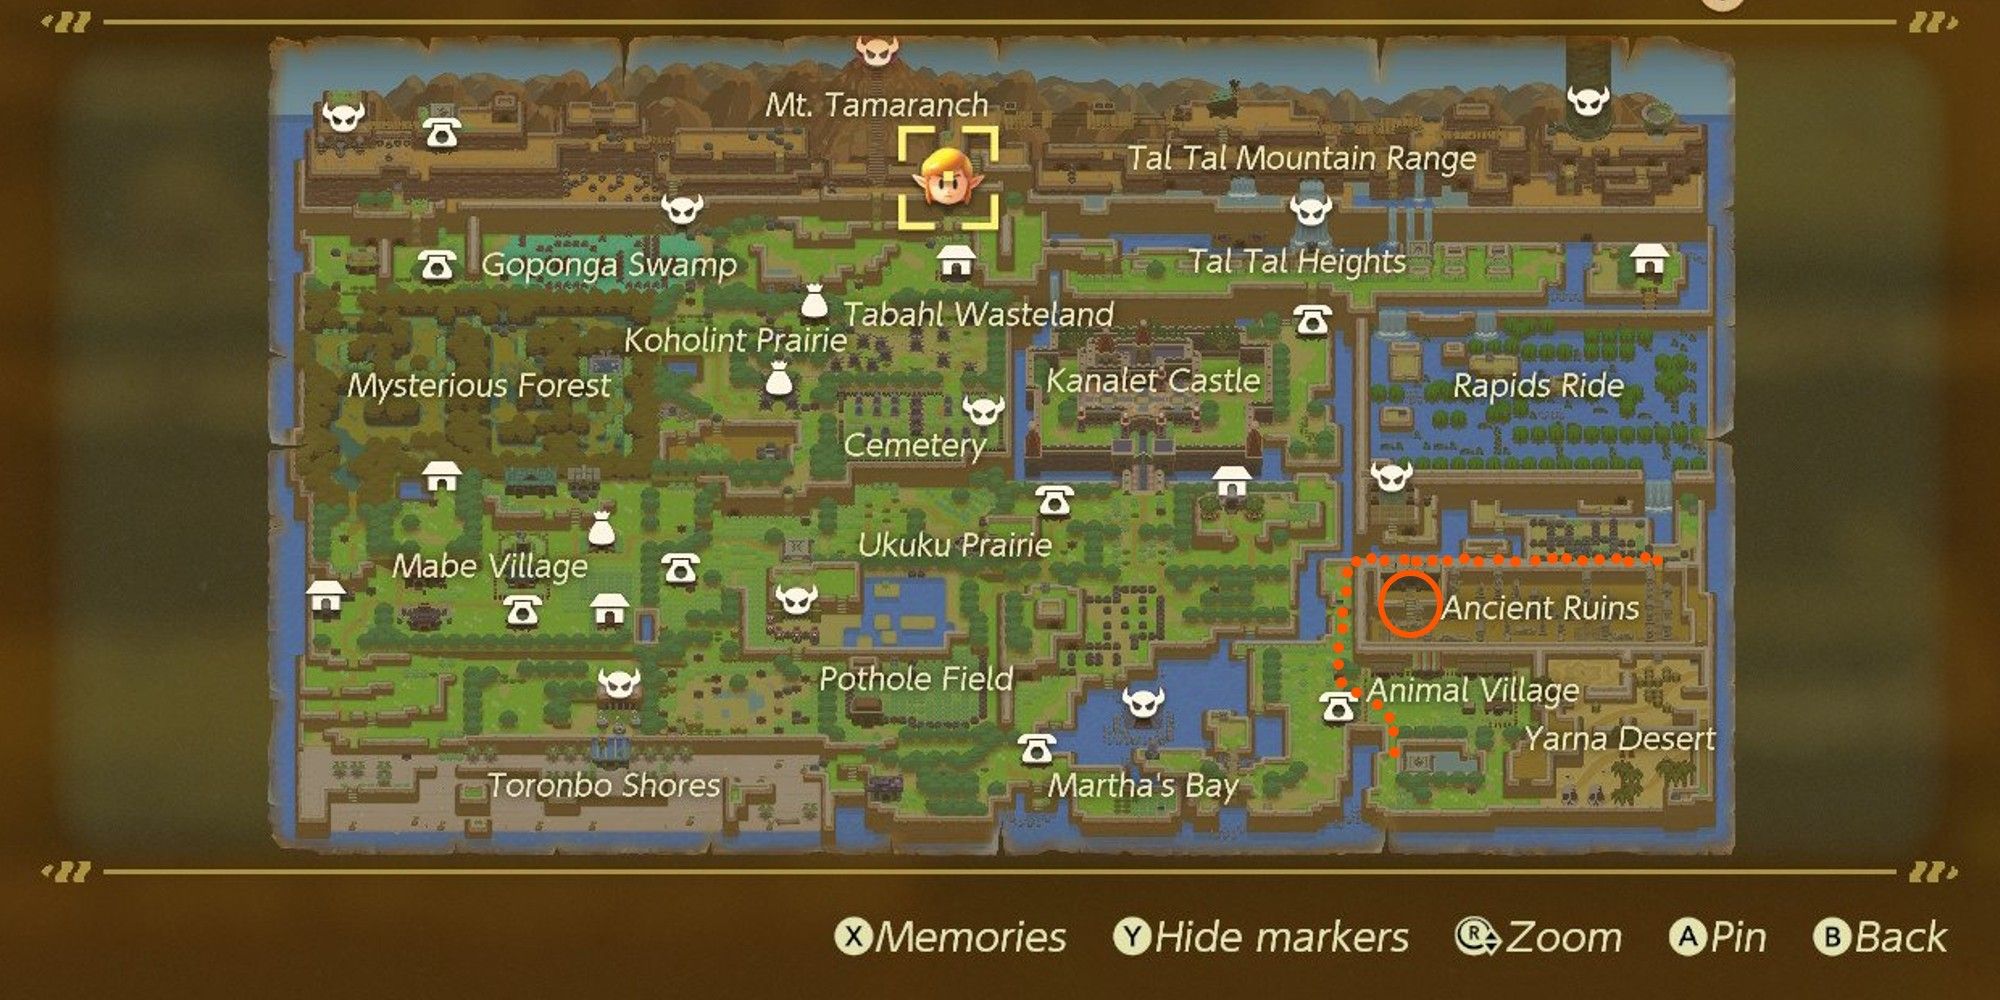 links awakening map with location of armos knight and face key circled